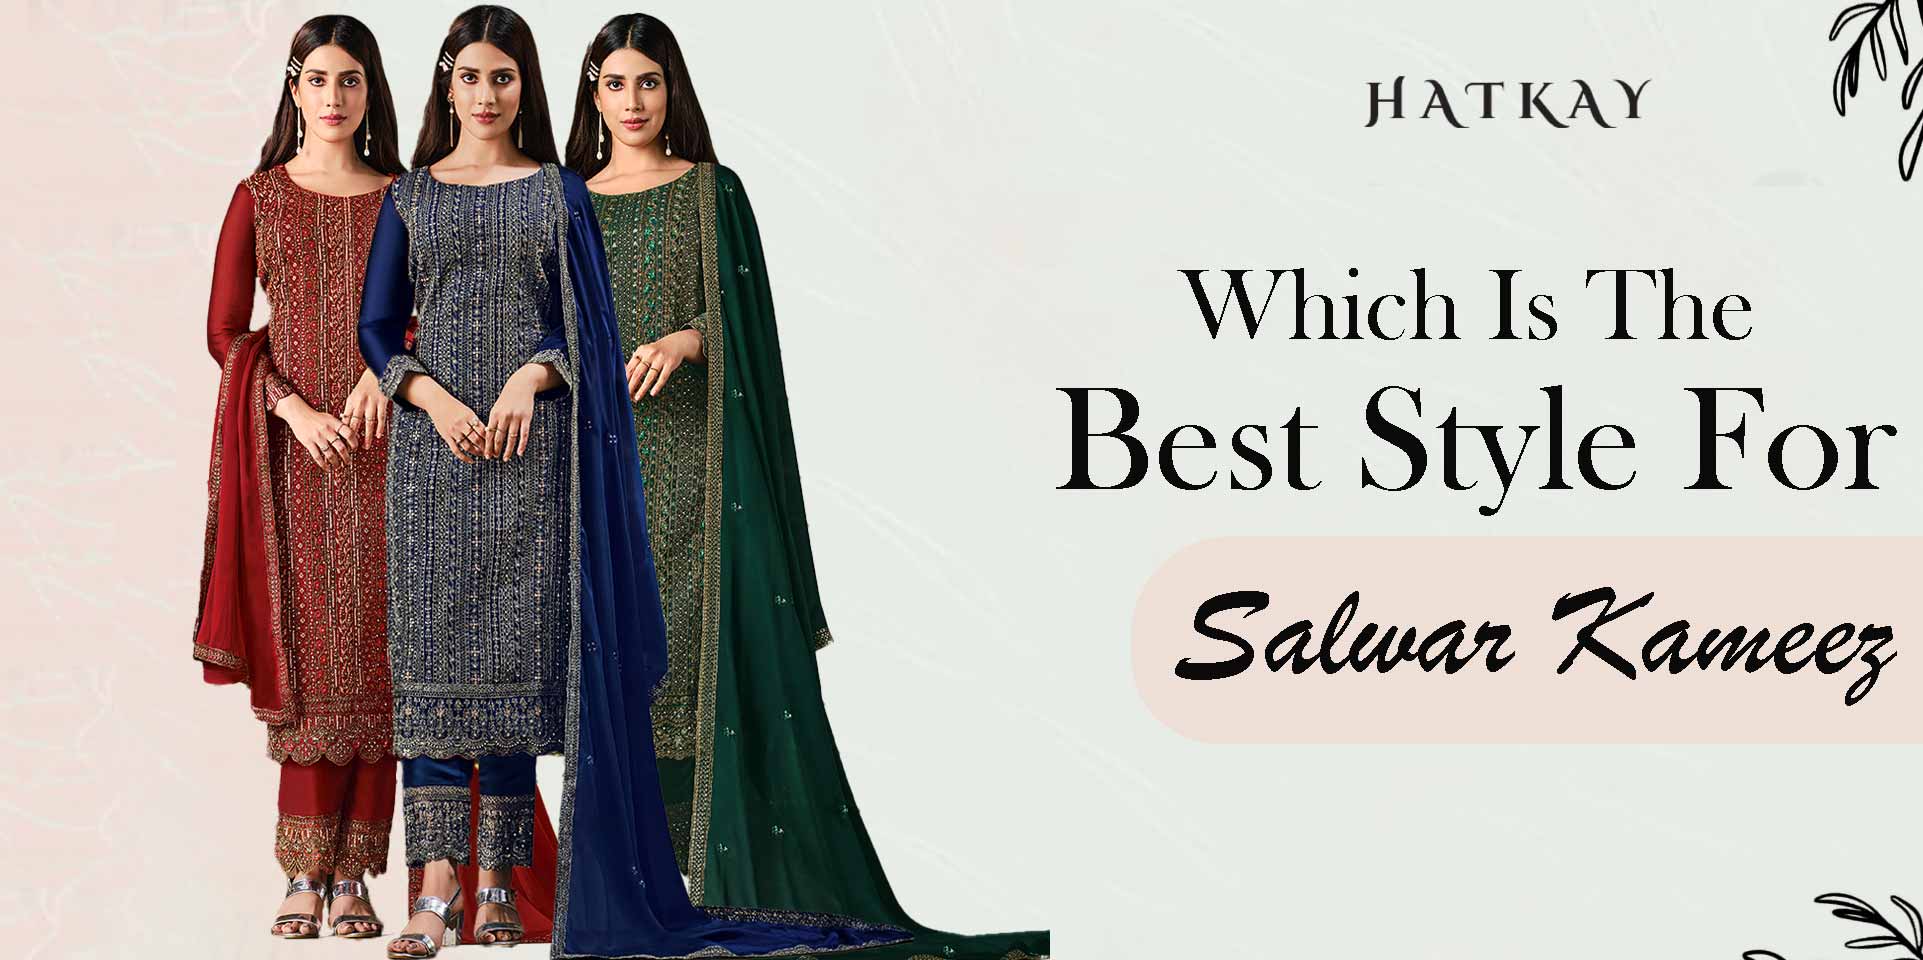 How Many Types of Salwar Kameez Styles are There? Which is the Best Type of Salwar Kameez Style?